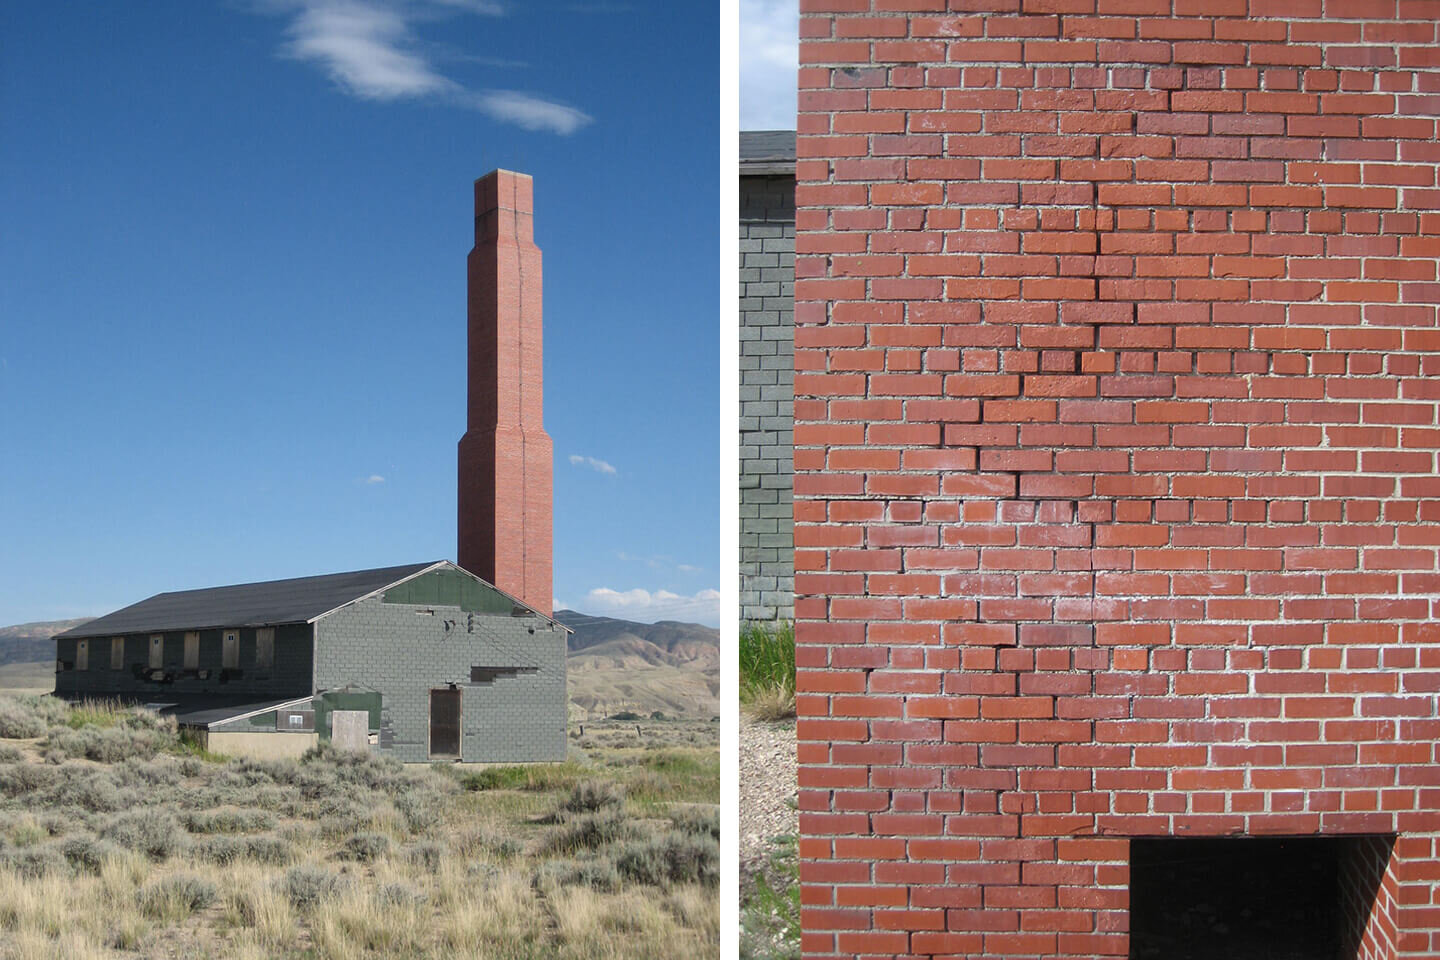 Building and details of damaged chimney mass